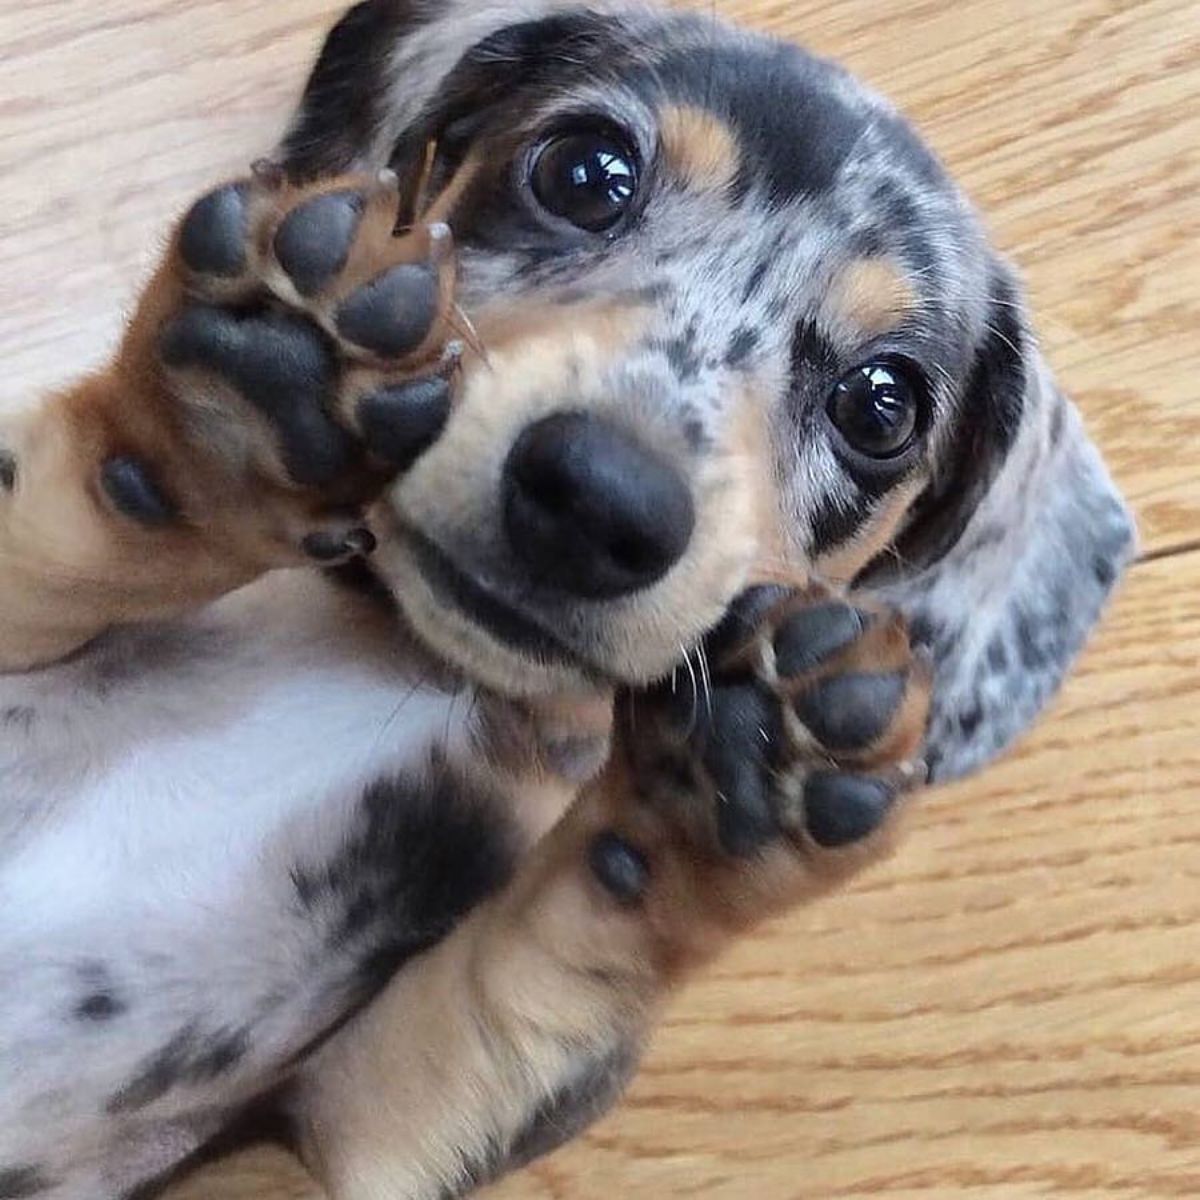 a black, brown and white dachshund puppy lying face up with its front paw toe beans showing